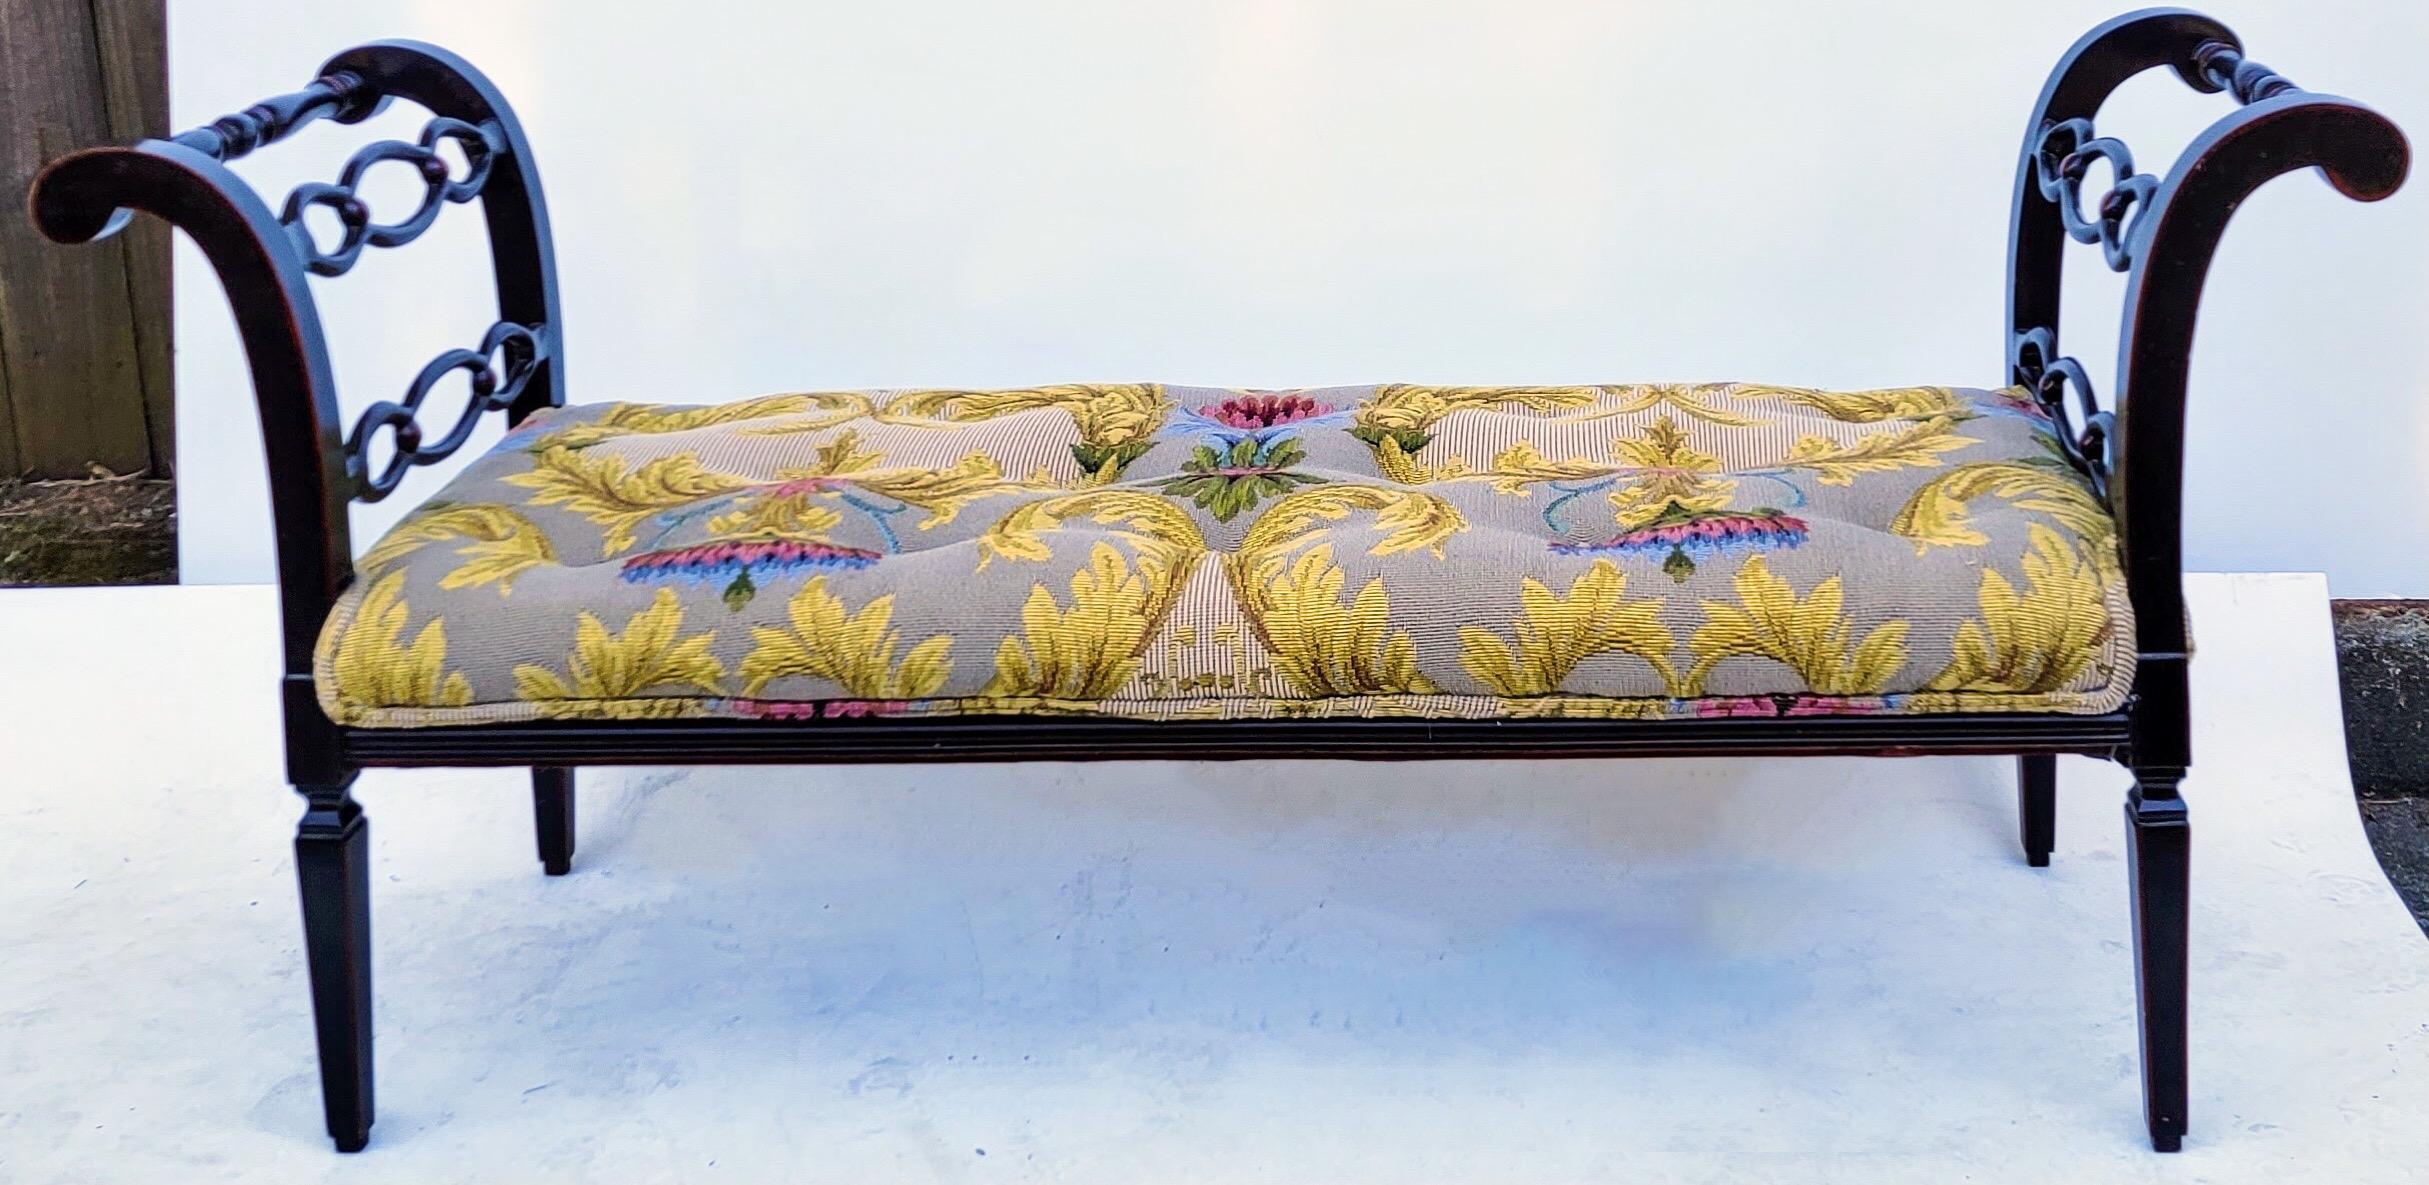 This is a lovely bench in a nice size! It has regency styling with it’s black lacquer painted frame and subtle red accents. The vintage upholstery is in very good condition and is a tapestry. The tapestry is taupe with gold, pink and blue